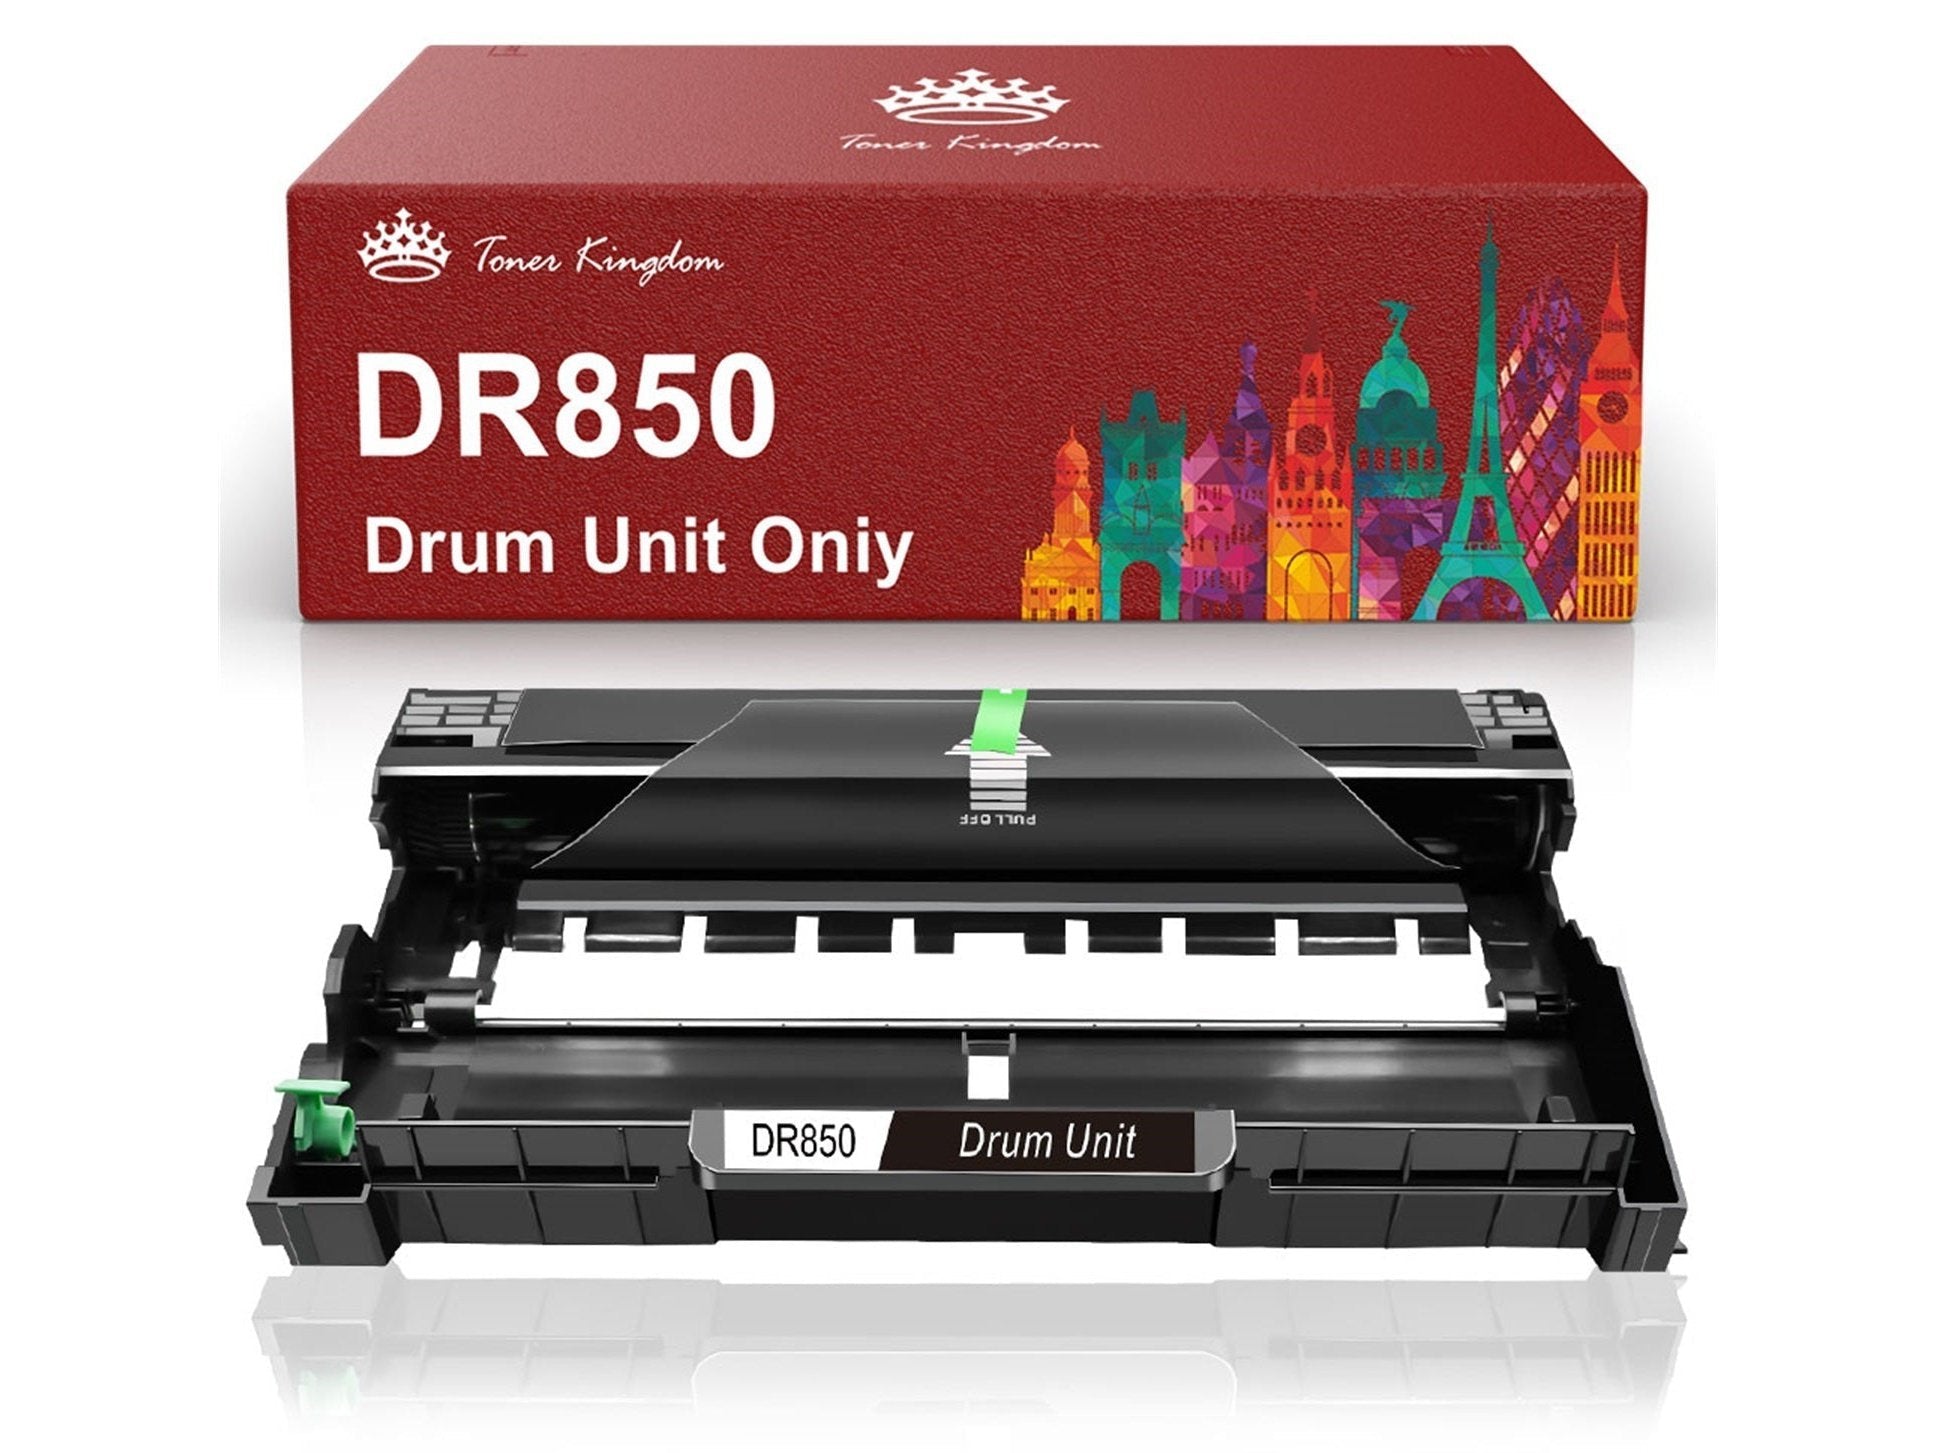 ICU Compatible/ OEM Brother DR850 High Yields Up to 30,000 Pages